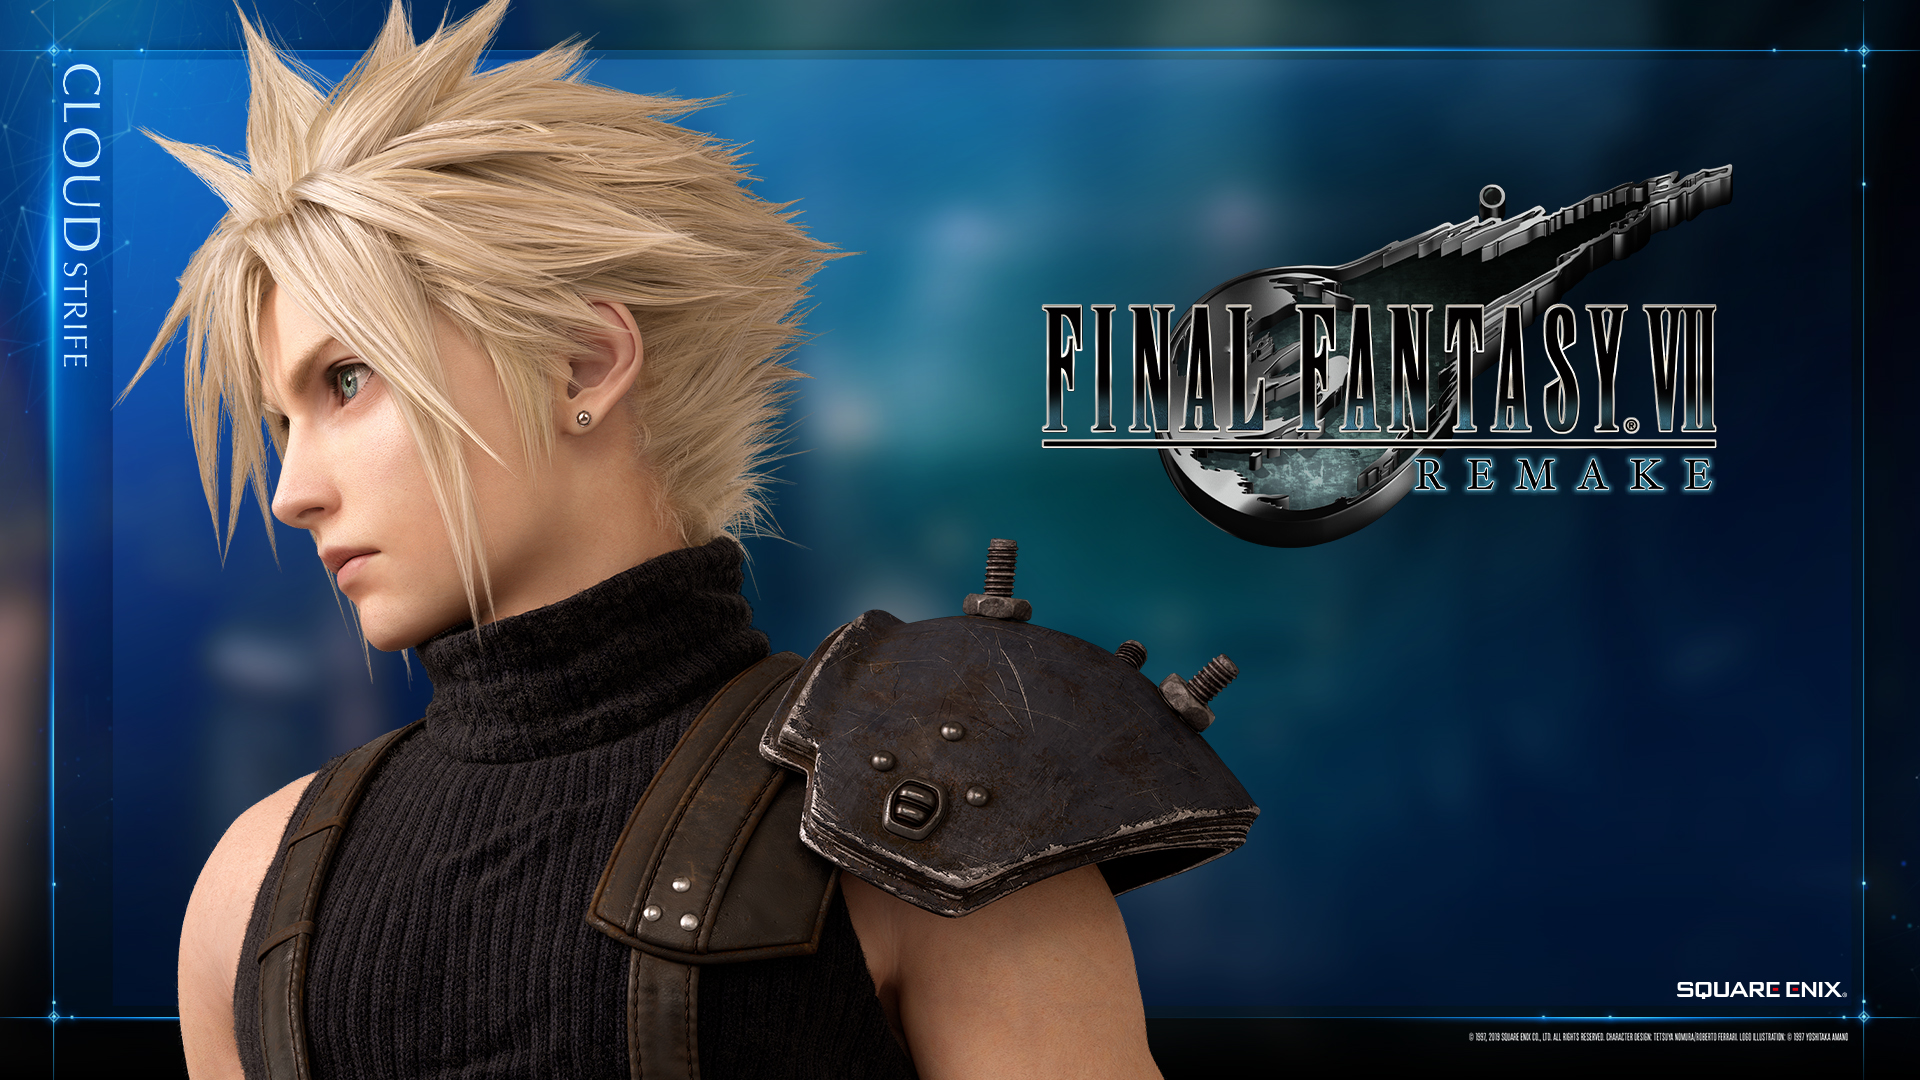 Final Fantasy Vii Remake Wallpapers Of Cloud Strife And Barret Wallace Now Available Siliconera